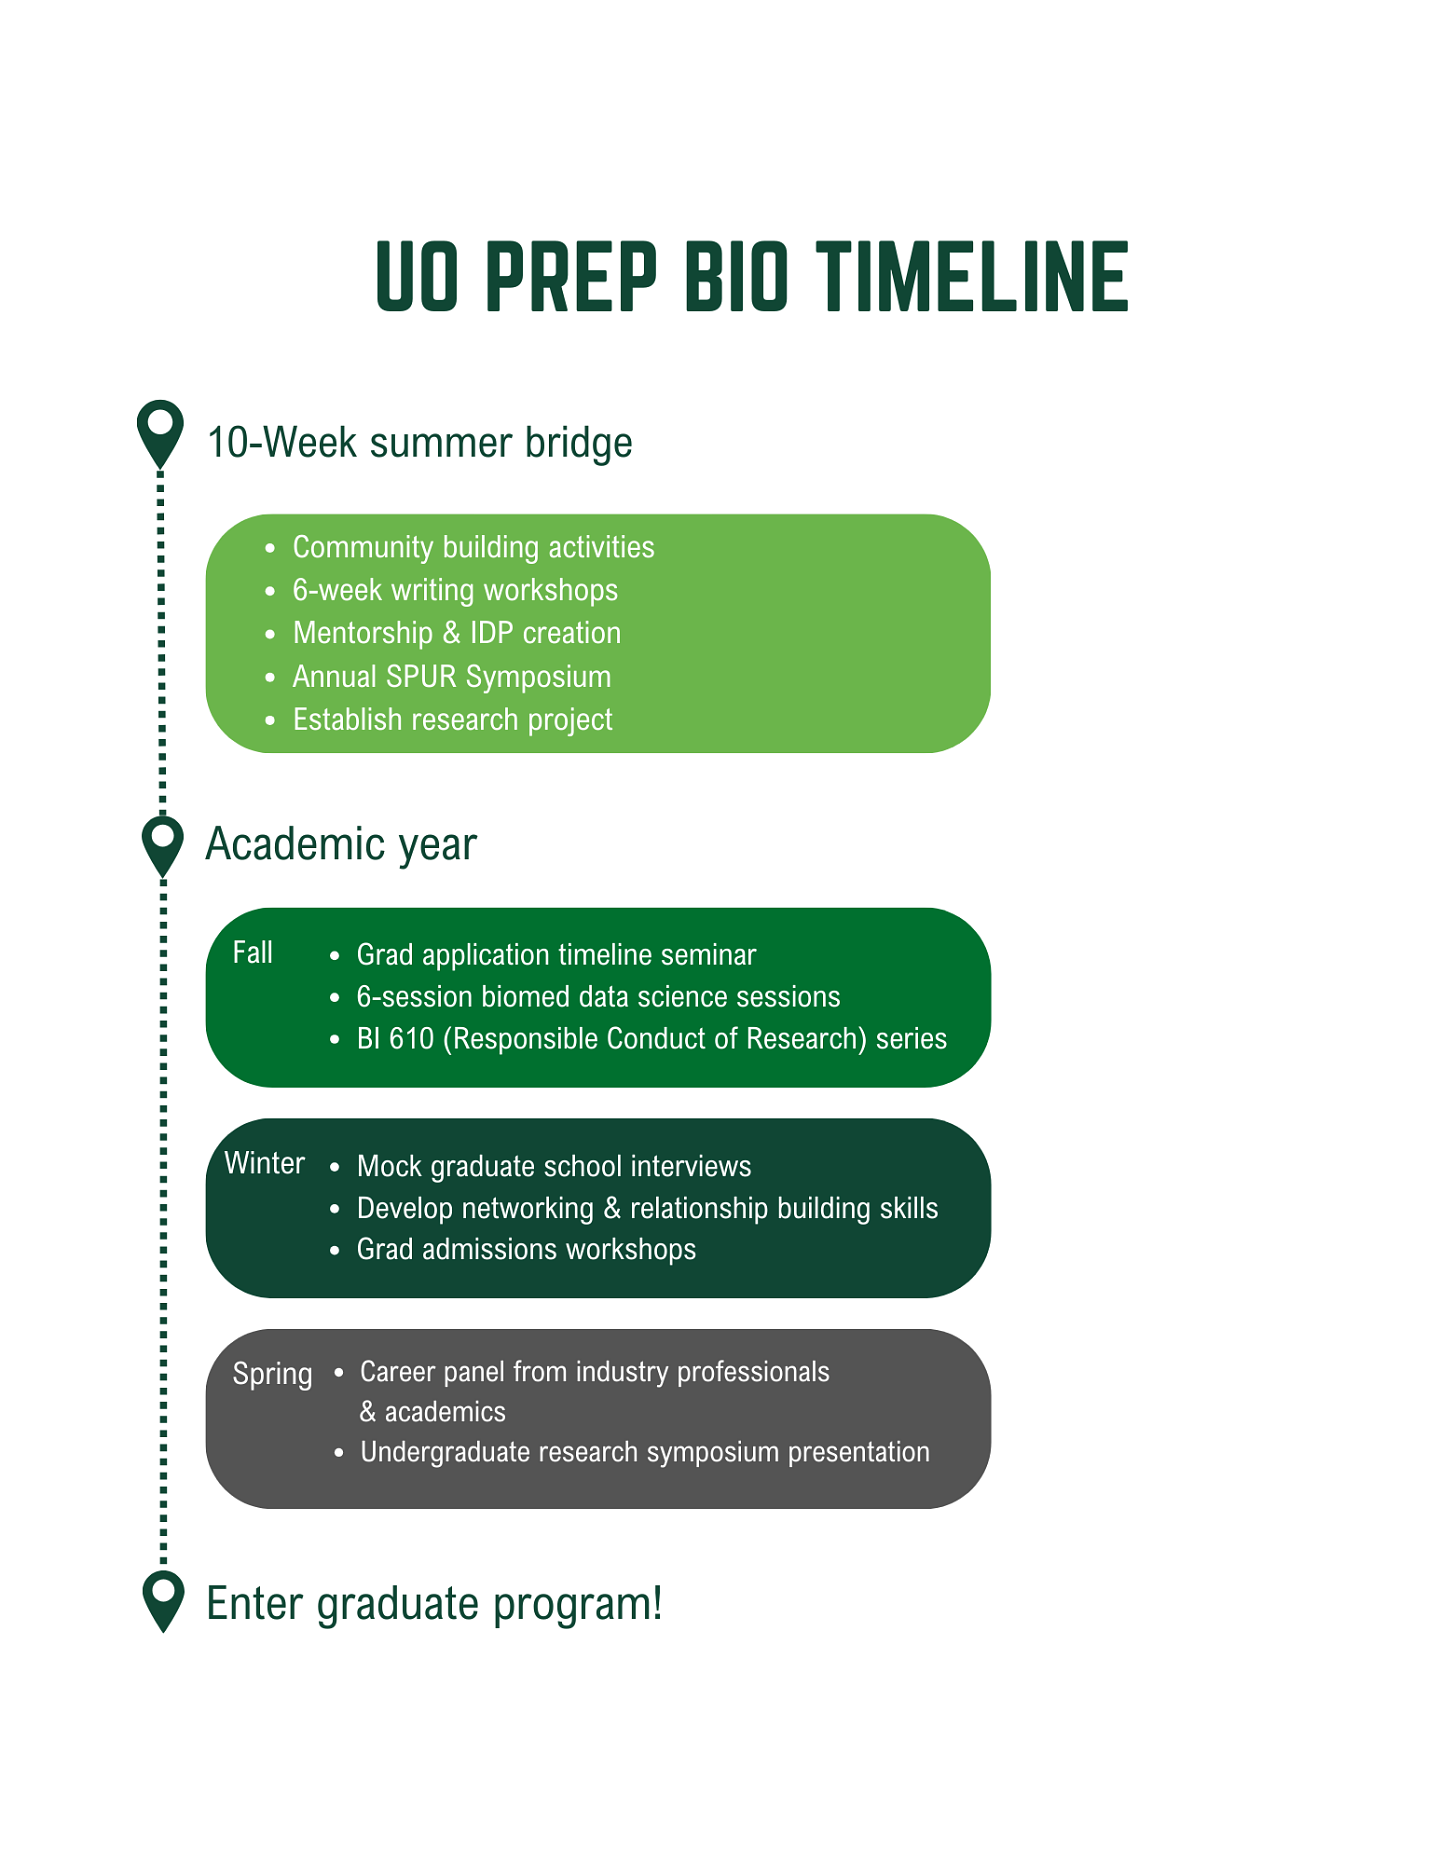 Prep bio timeline starting with the summer bridge program and ending with graduate school